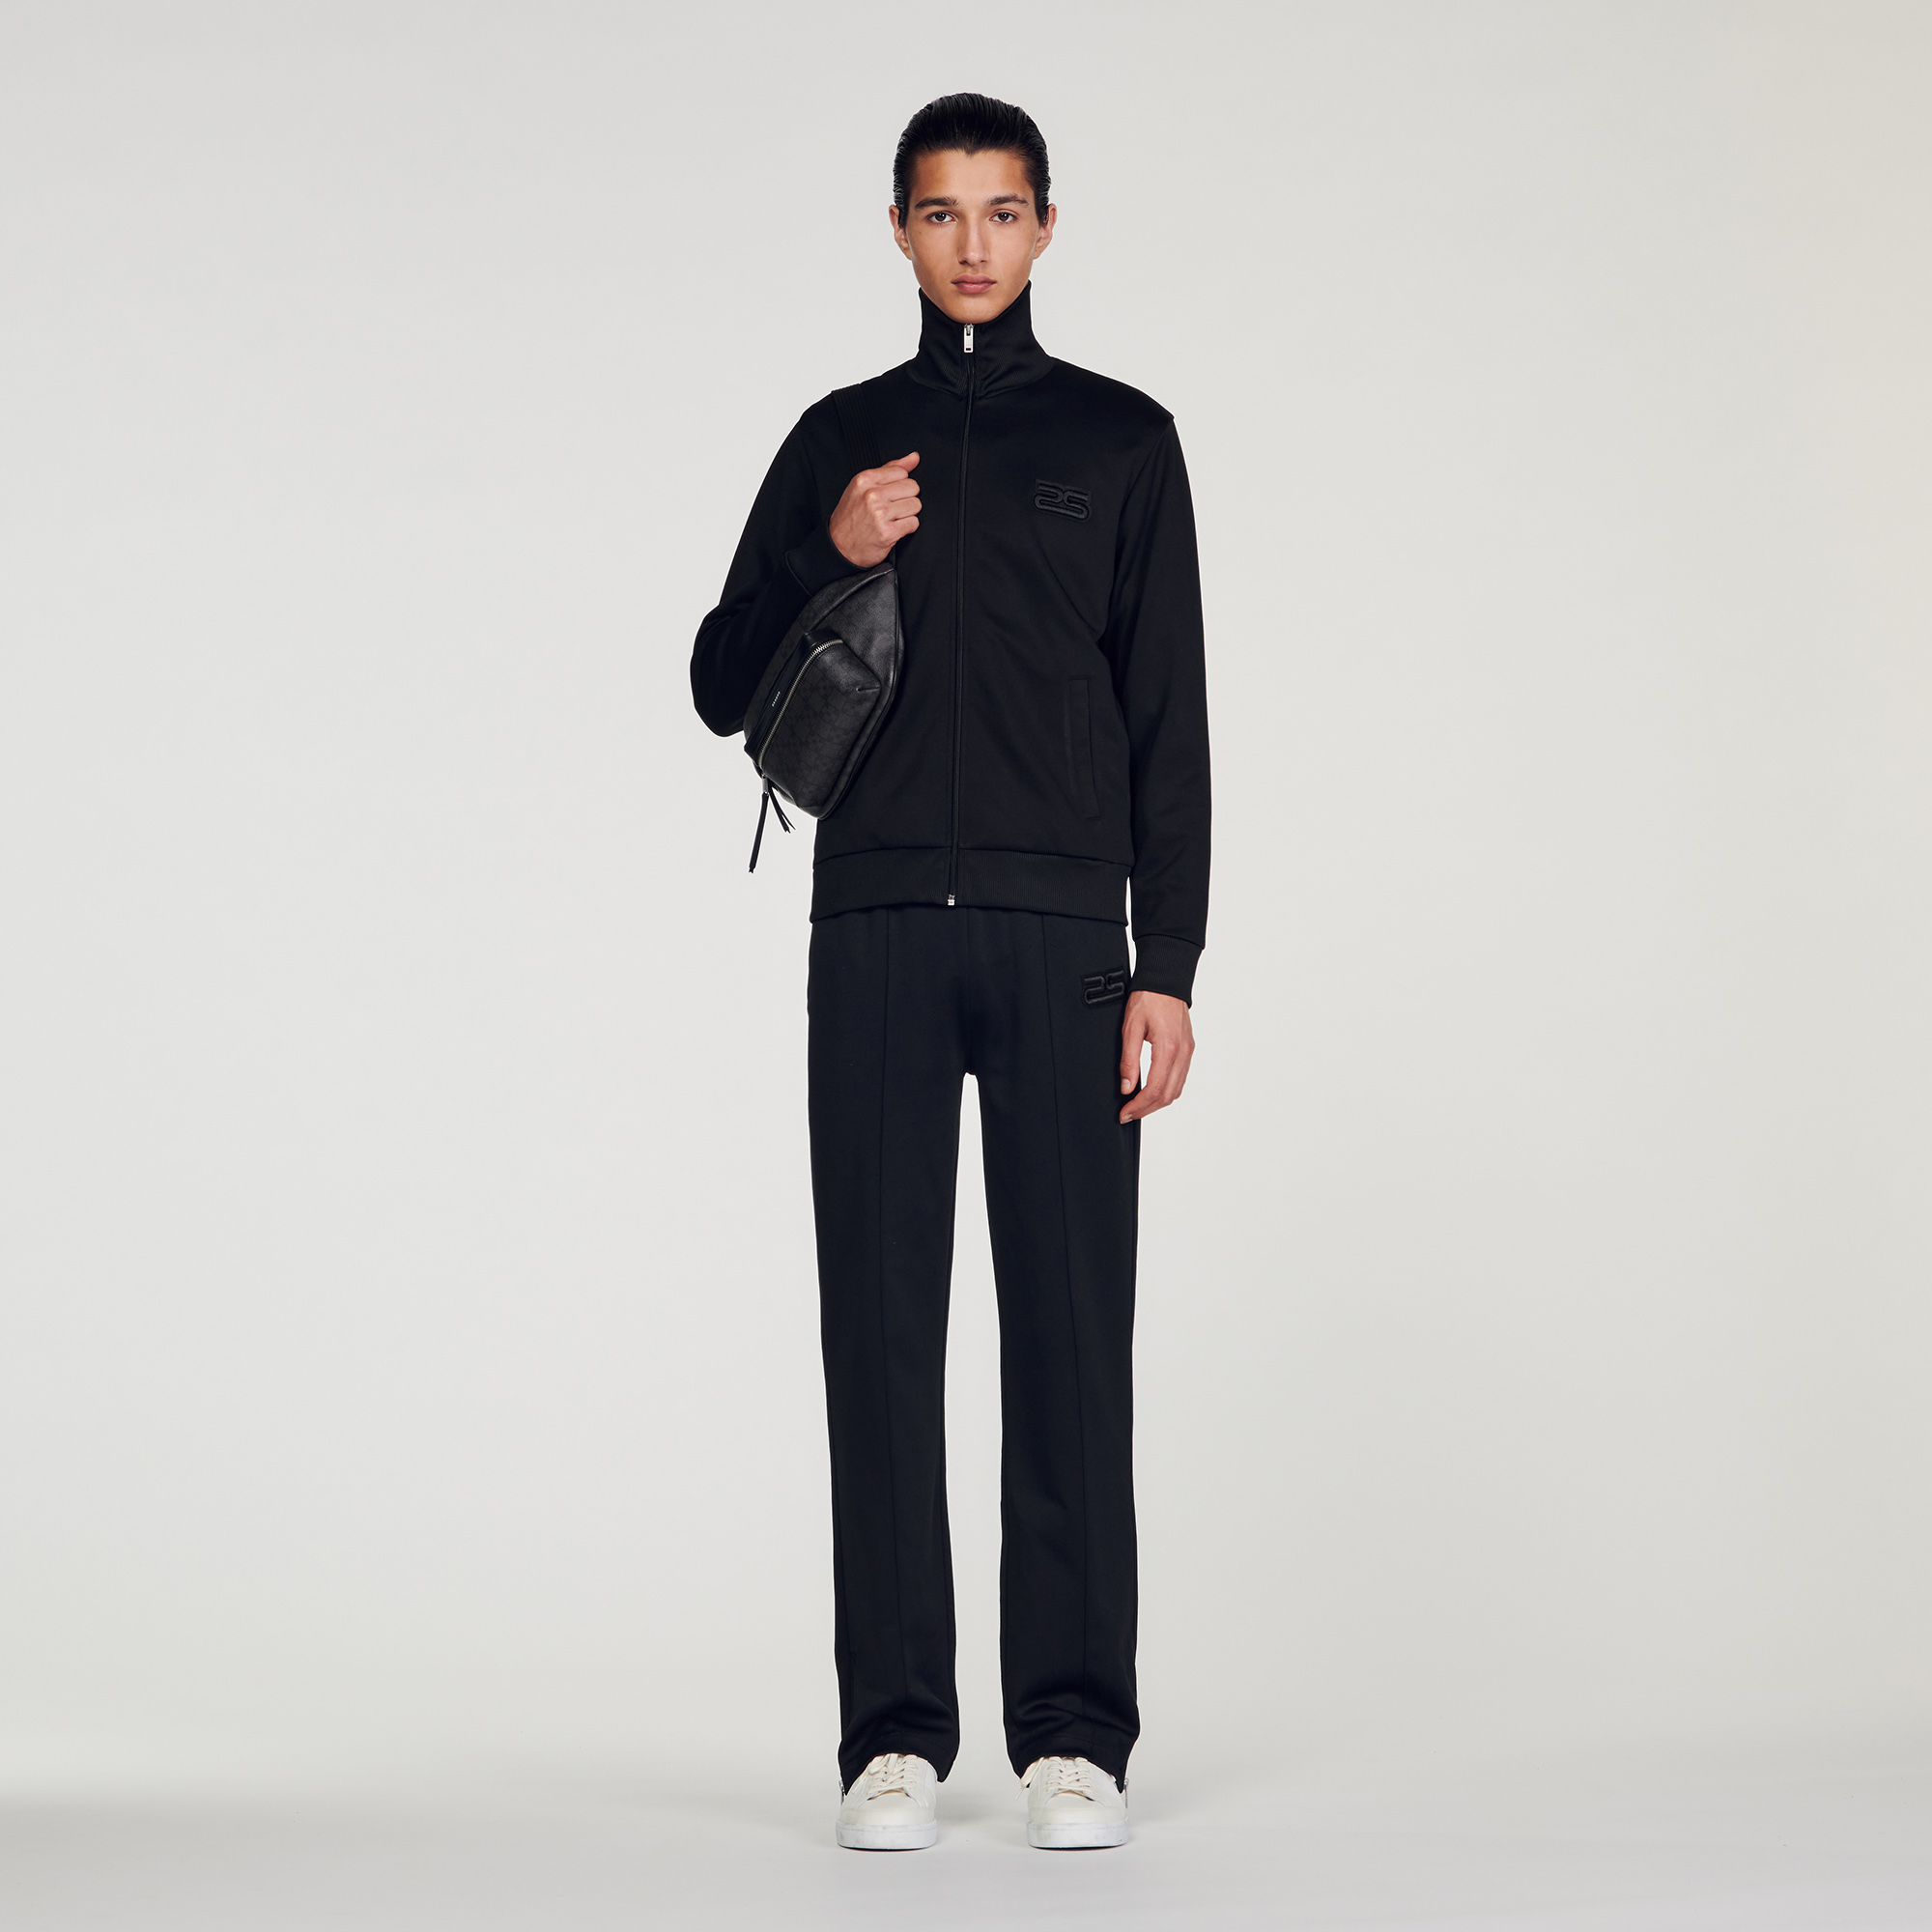 Sandro polyester Zip-up technical cardigan with long sleeves and a stand-up collar